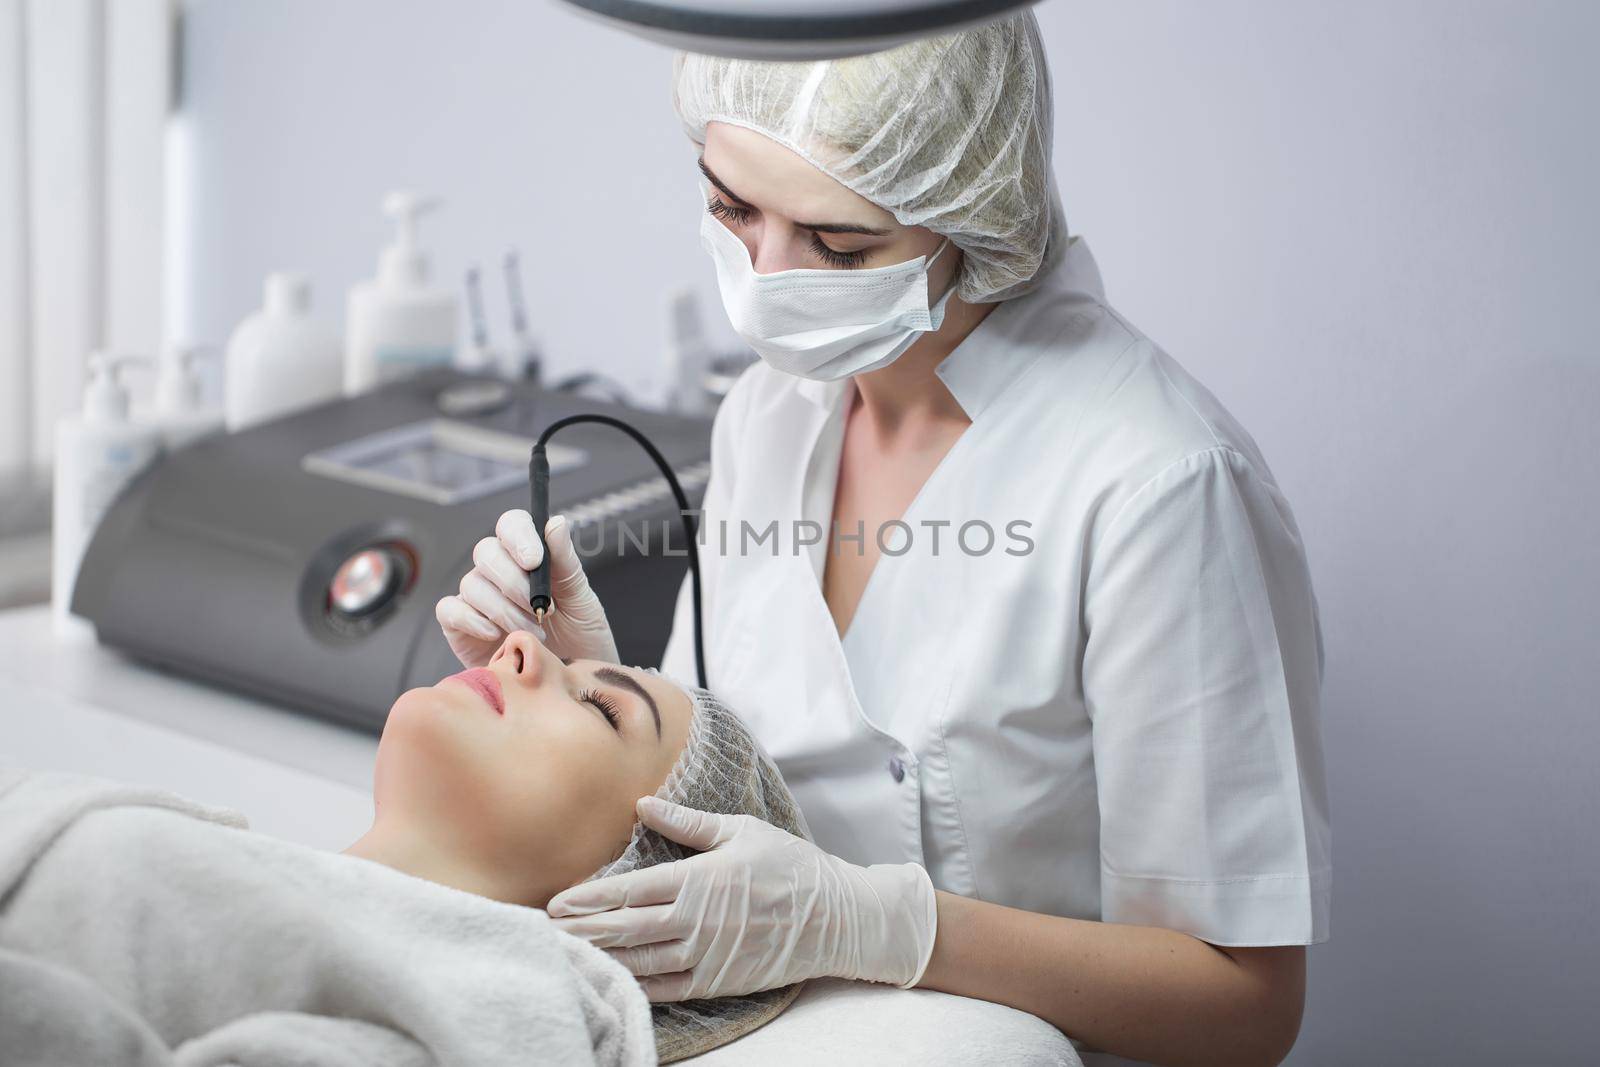 Ultrasonic cavitation, facial cleansing in the cosmetology office